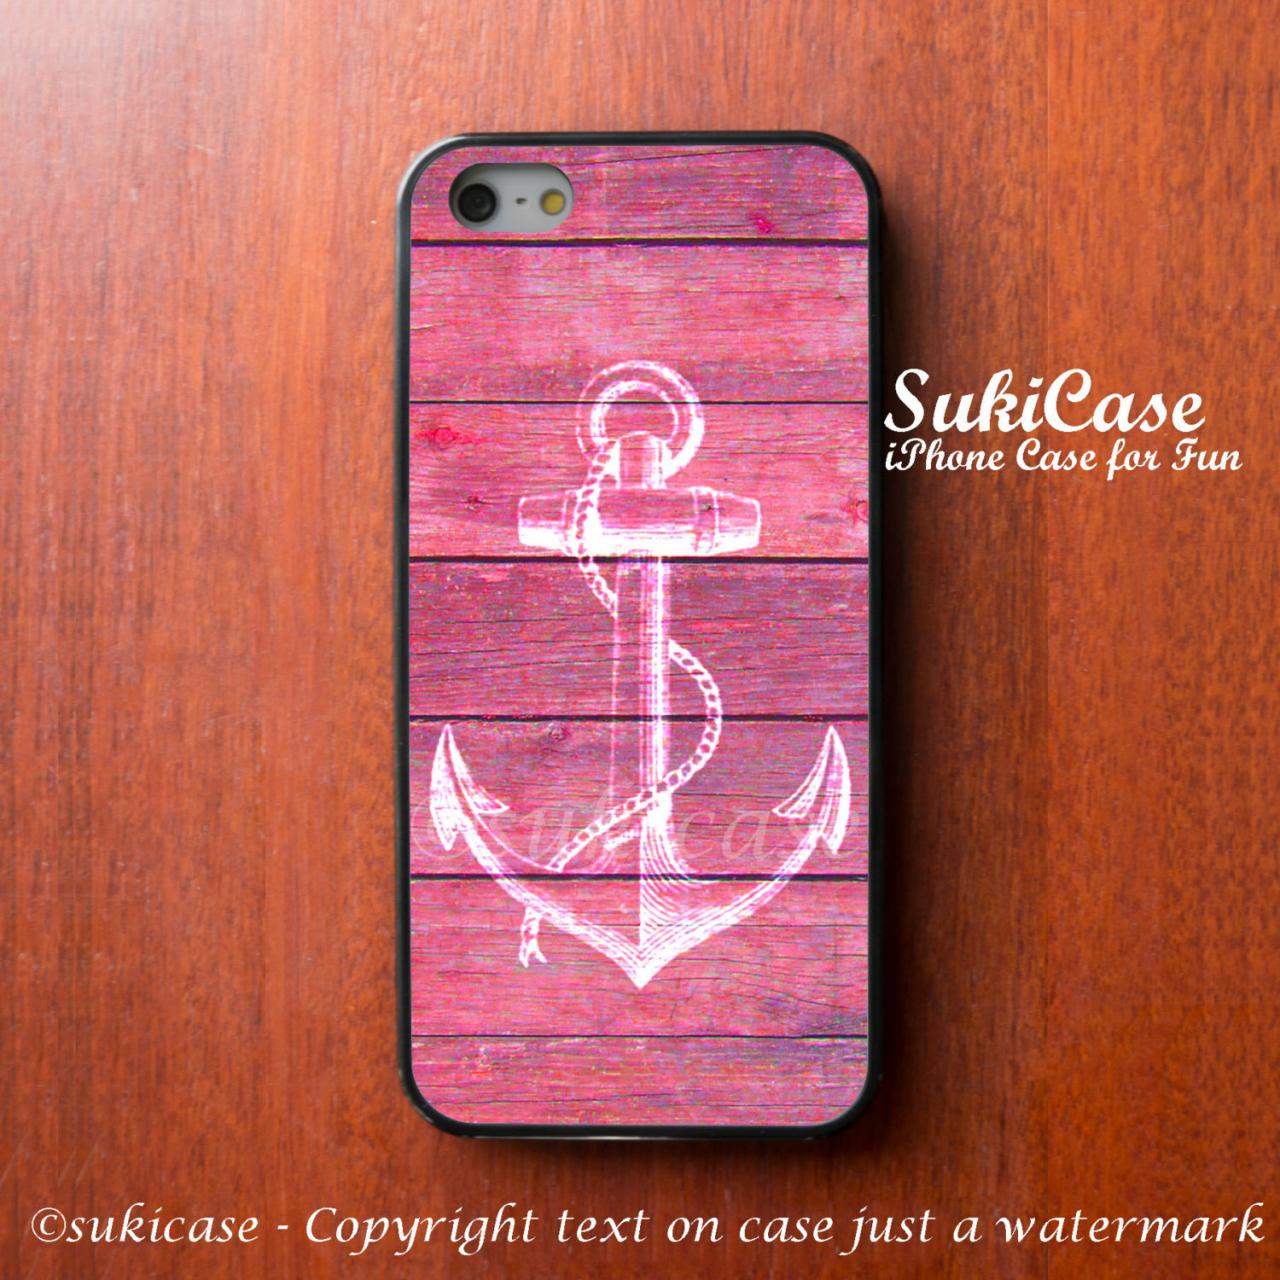 Iphone 5s Case White Anchor Girly Pink Wood Pattern Fashion Iphone Case Iphone 5 Case Iphone 4 Case Samsung S3 S4 Cover Iphone 5c Iphone 4s